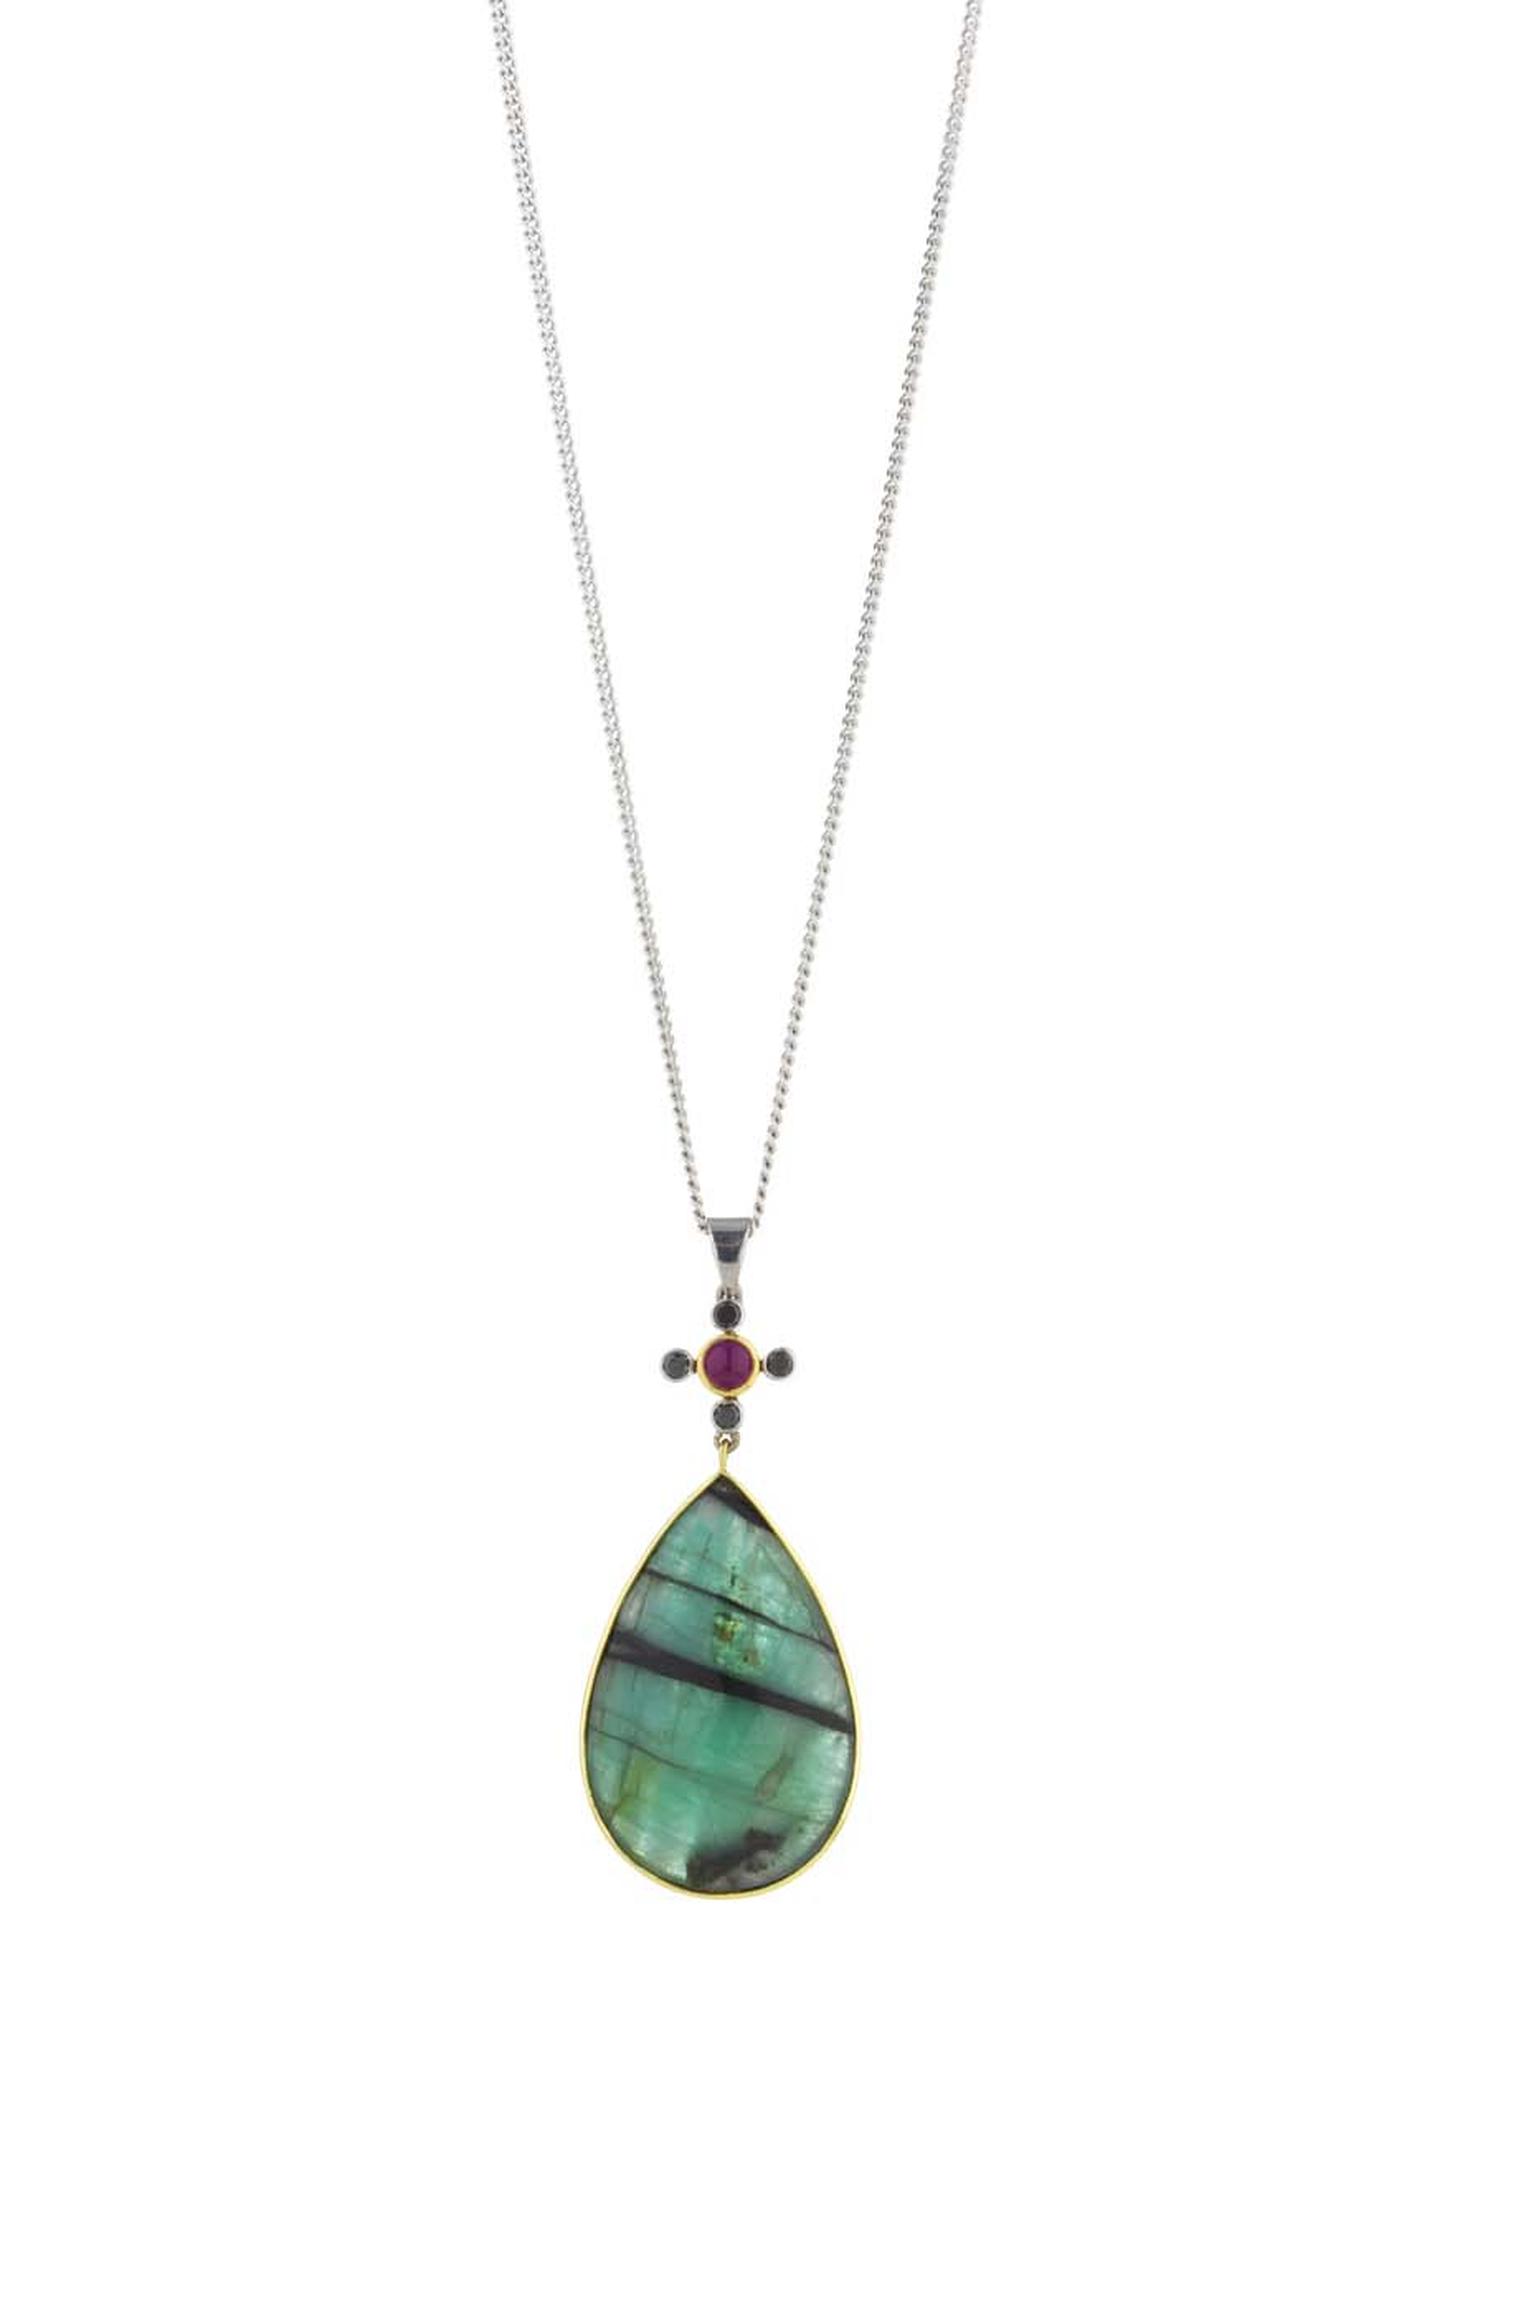 Holts London Portobello pendant with a rose-cut emerald drop with black inclusions suspended from a cross set with a ruby cabochon and black diamonds (£1,845).